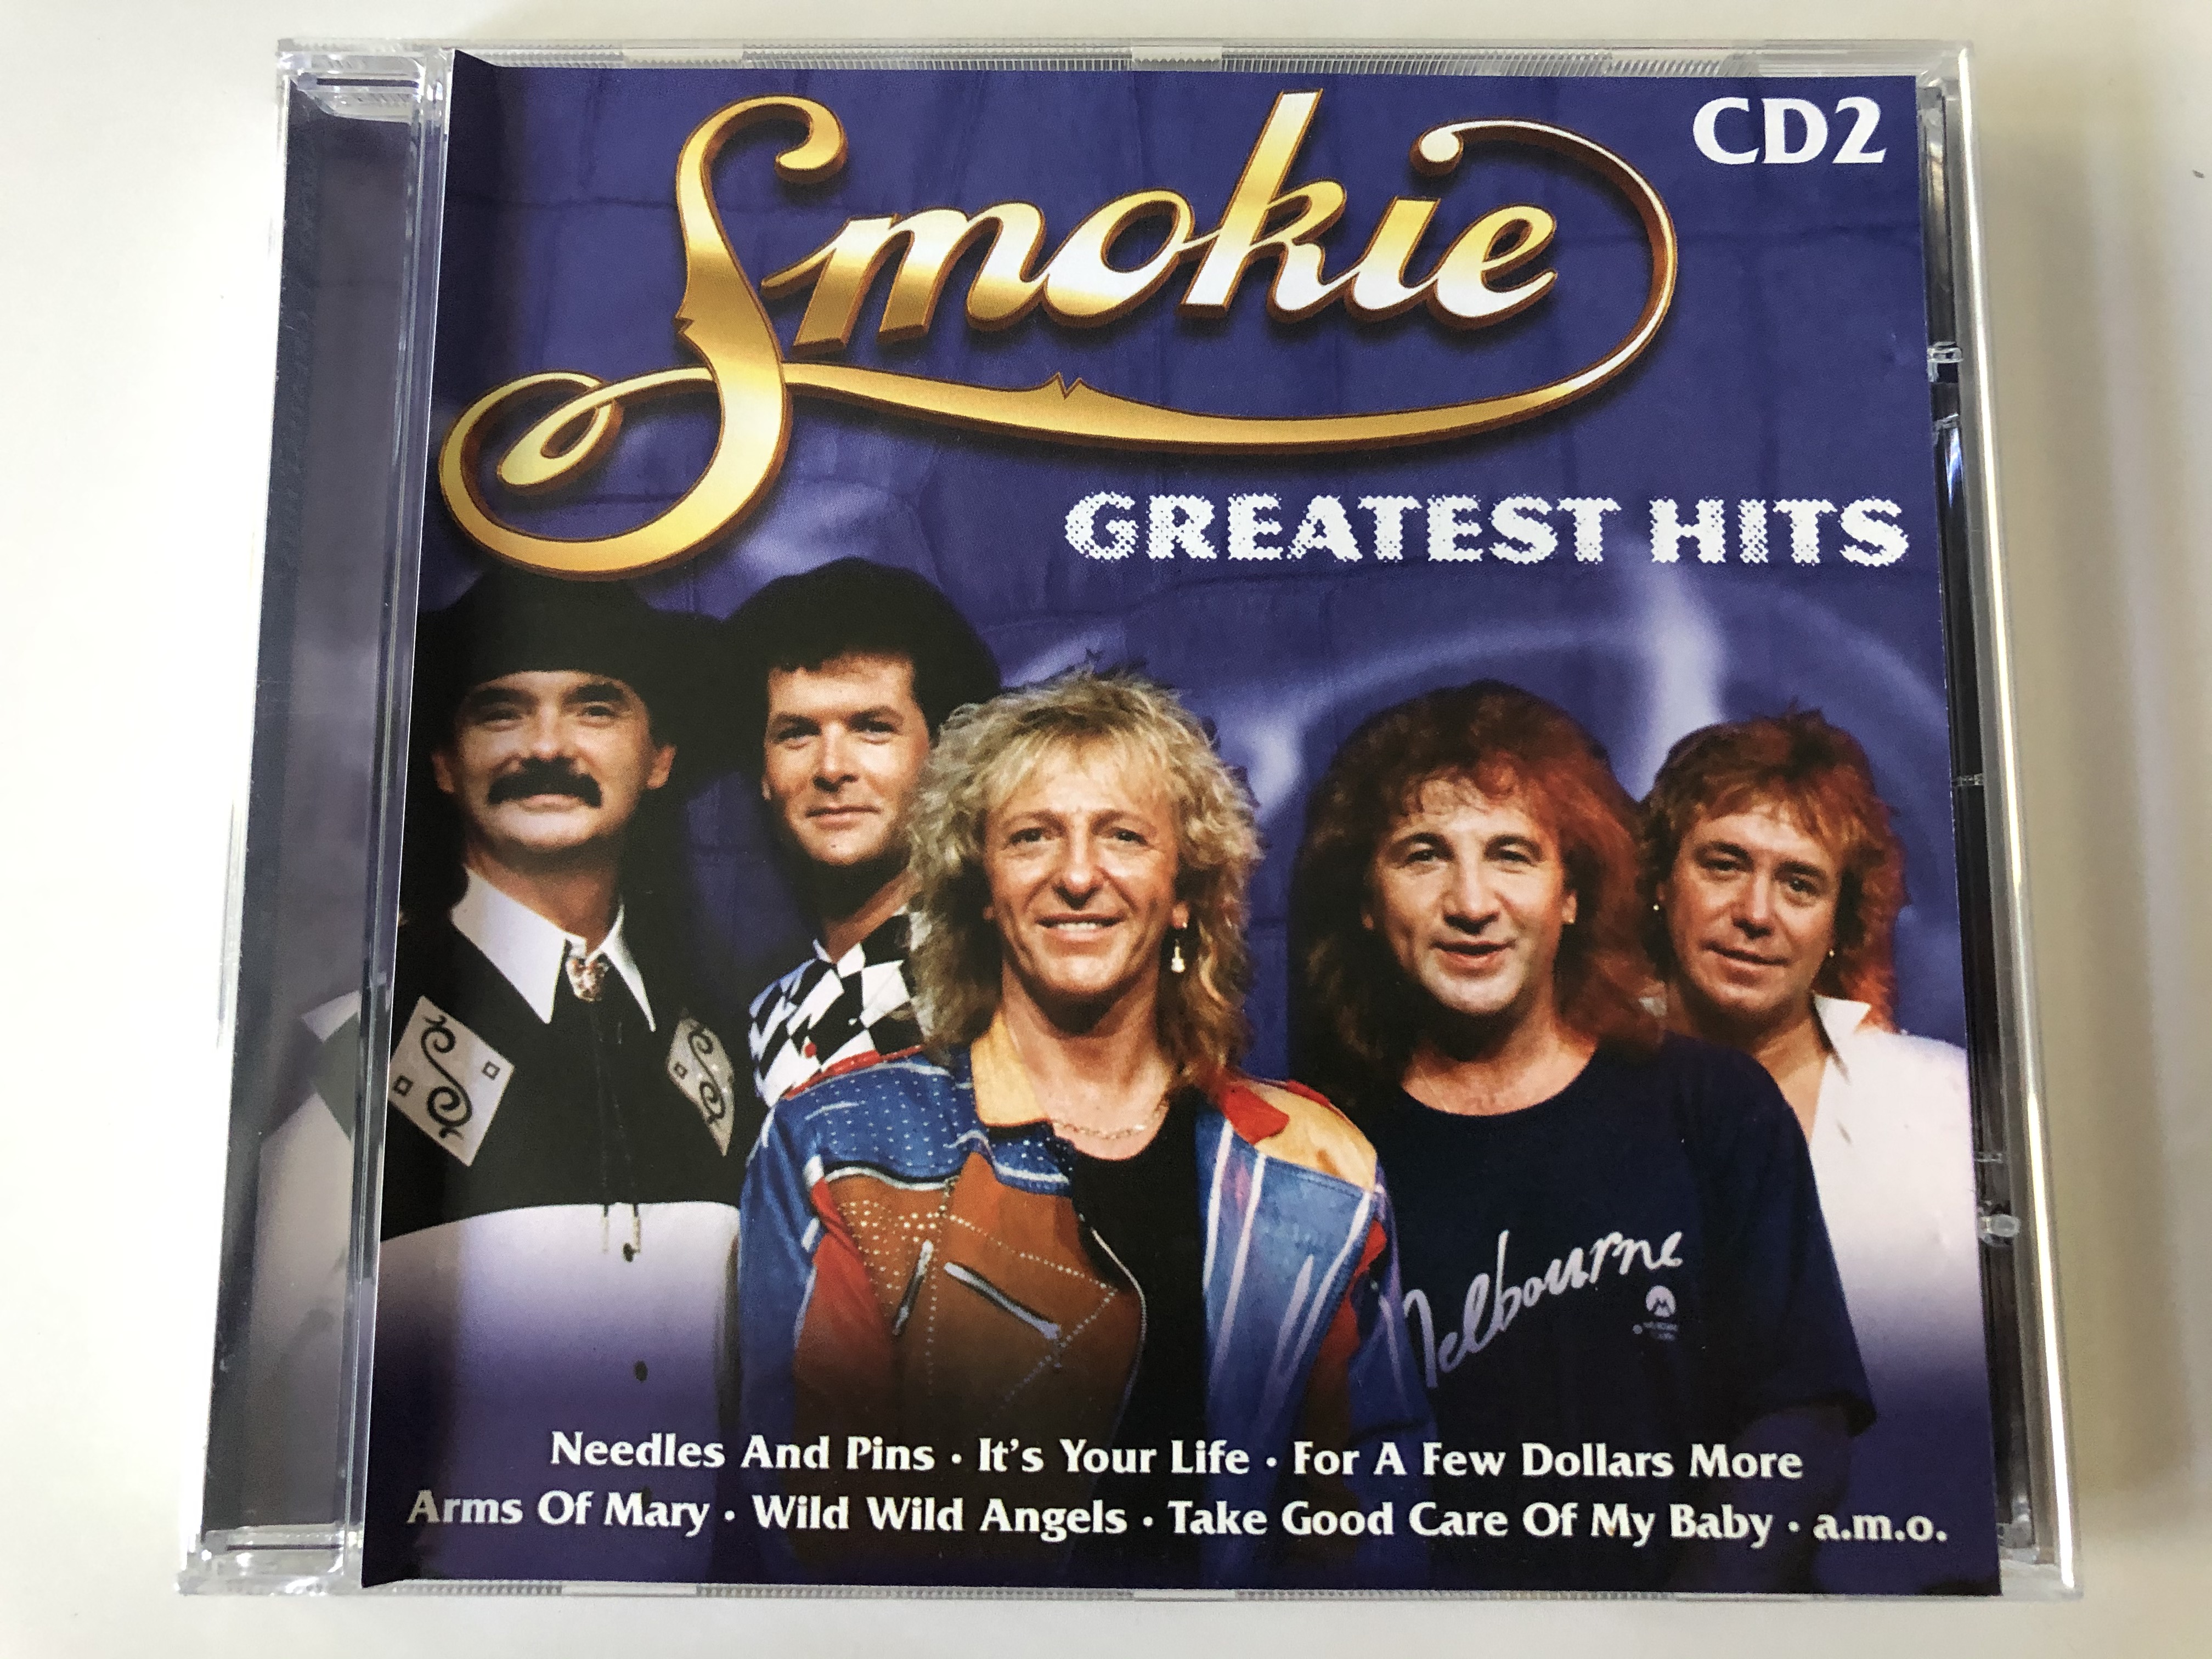 smokie-greatest-hits-cd-2-needles-and-pins-it-s-your-life-for-a-few-dollars-more-arms-of-mary-wild-wild-angels-take-good-care-of-my-baby-a.m.o.-eurotrend-audio-cd-cd-141-1-.jpg